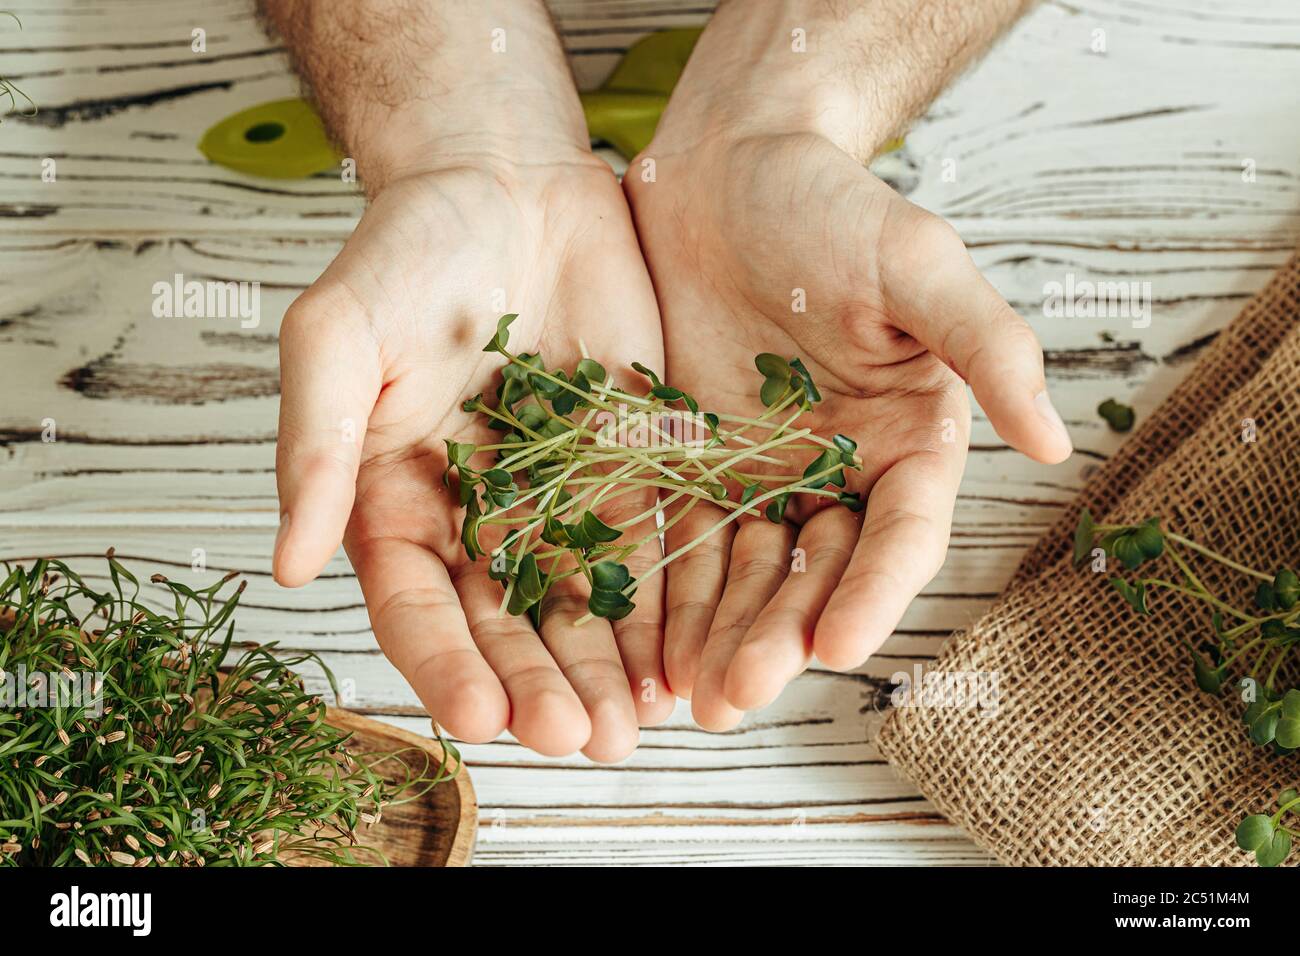 Male hands holding micro green sprouts, close up Stock Photo